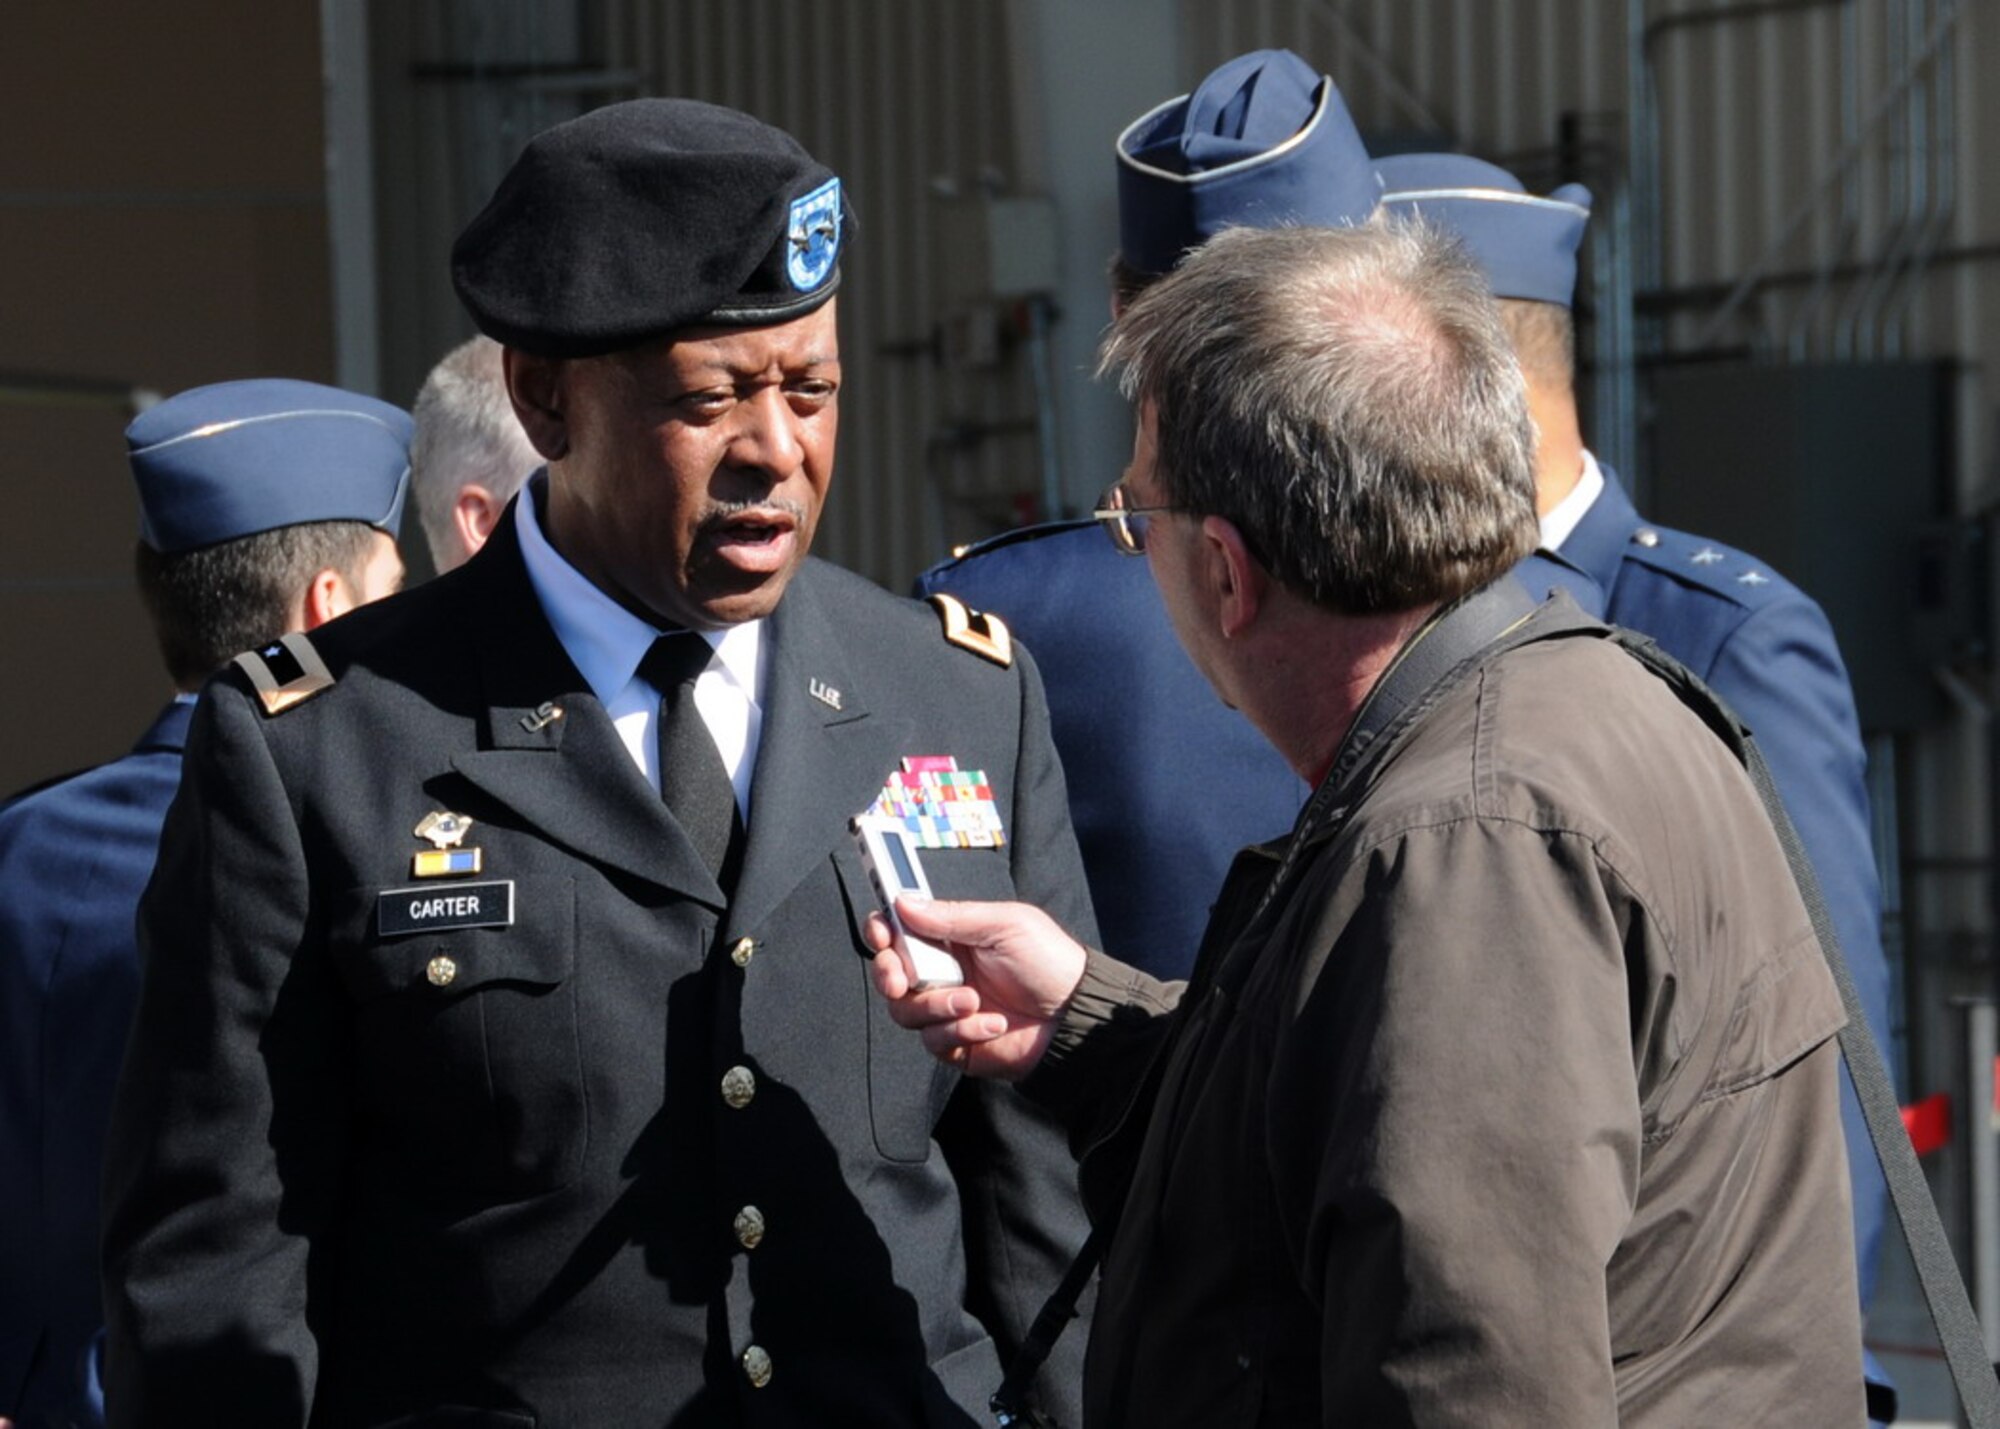 Maj. Gen.  Joseph Carter, the MA Adjutant General, is interviewed by Westfield News photographer Mr. Fred Gore in front of the new Air Sovereignty Alert hangar at the 104th Fighter Wing, Massachusetts Air National Guard base in Westfield Massachusetts on April 10, 2010 just after the official ribbon cutting ceremony.  The wing officially accepted the alert mission on February 15, 2010, and stands ready to defend the homeland if called upon.  (photograph by Senior Master Sgt. Robert J. Sabonis)